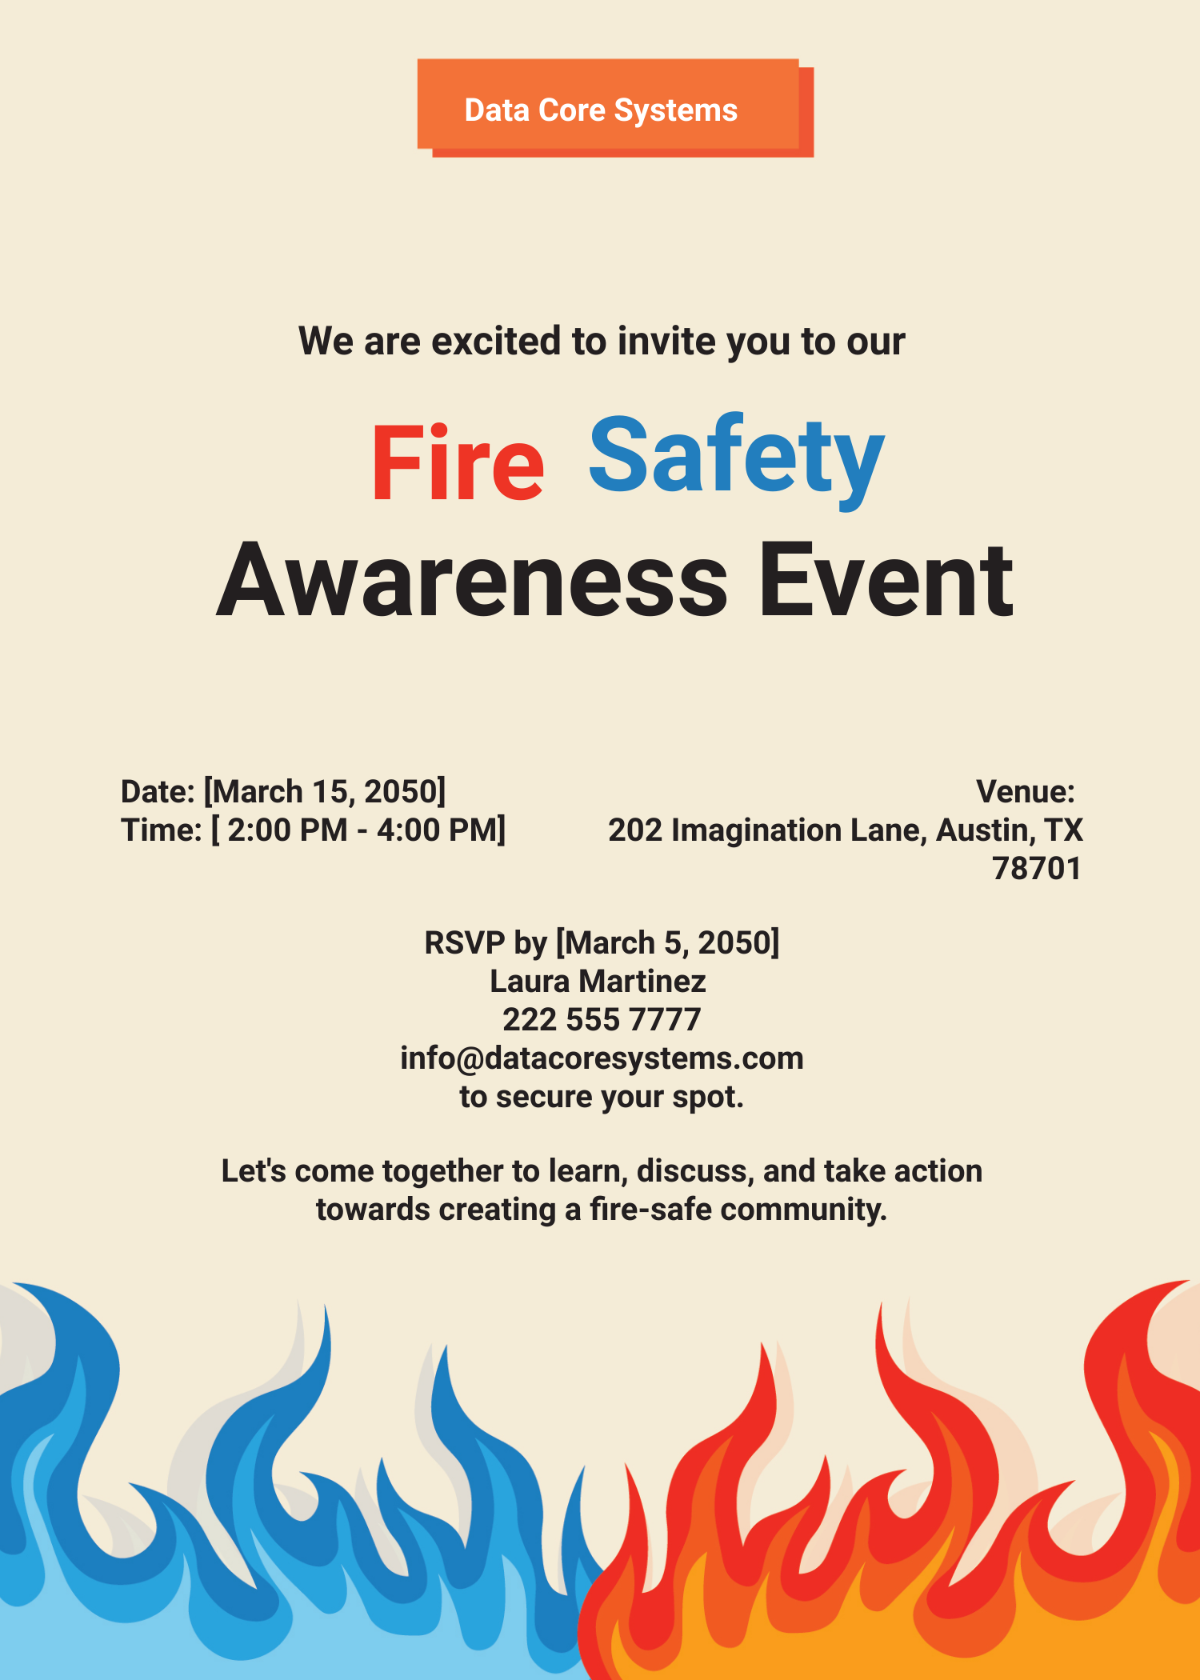 Fire Safety Awareness Event Invitation Card